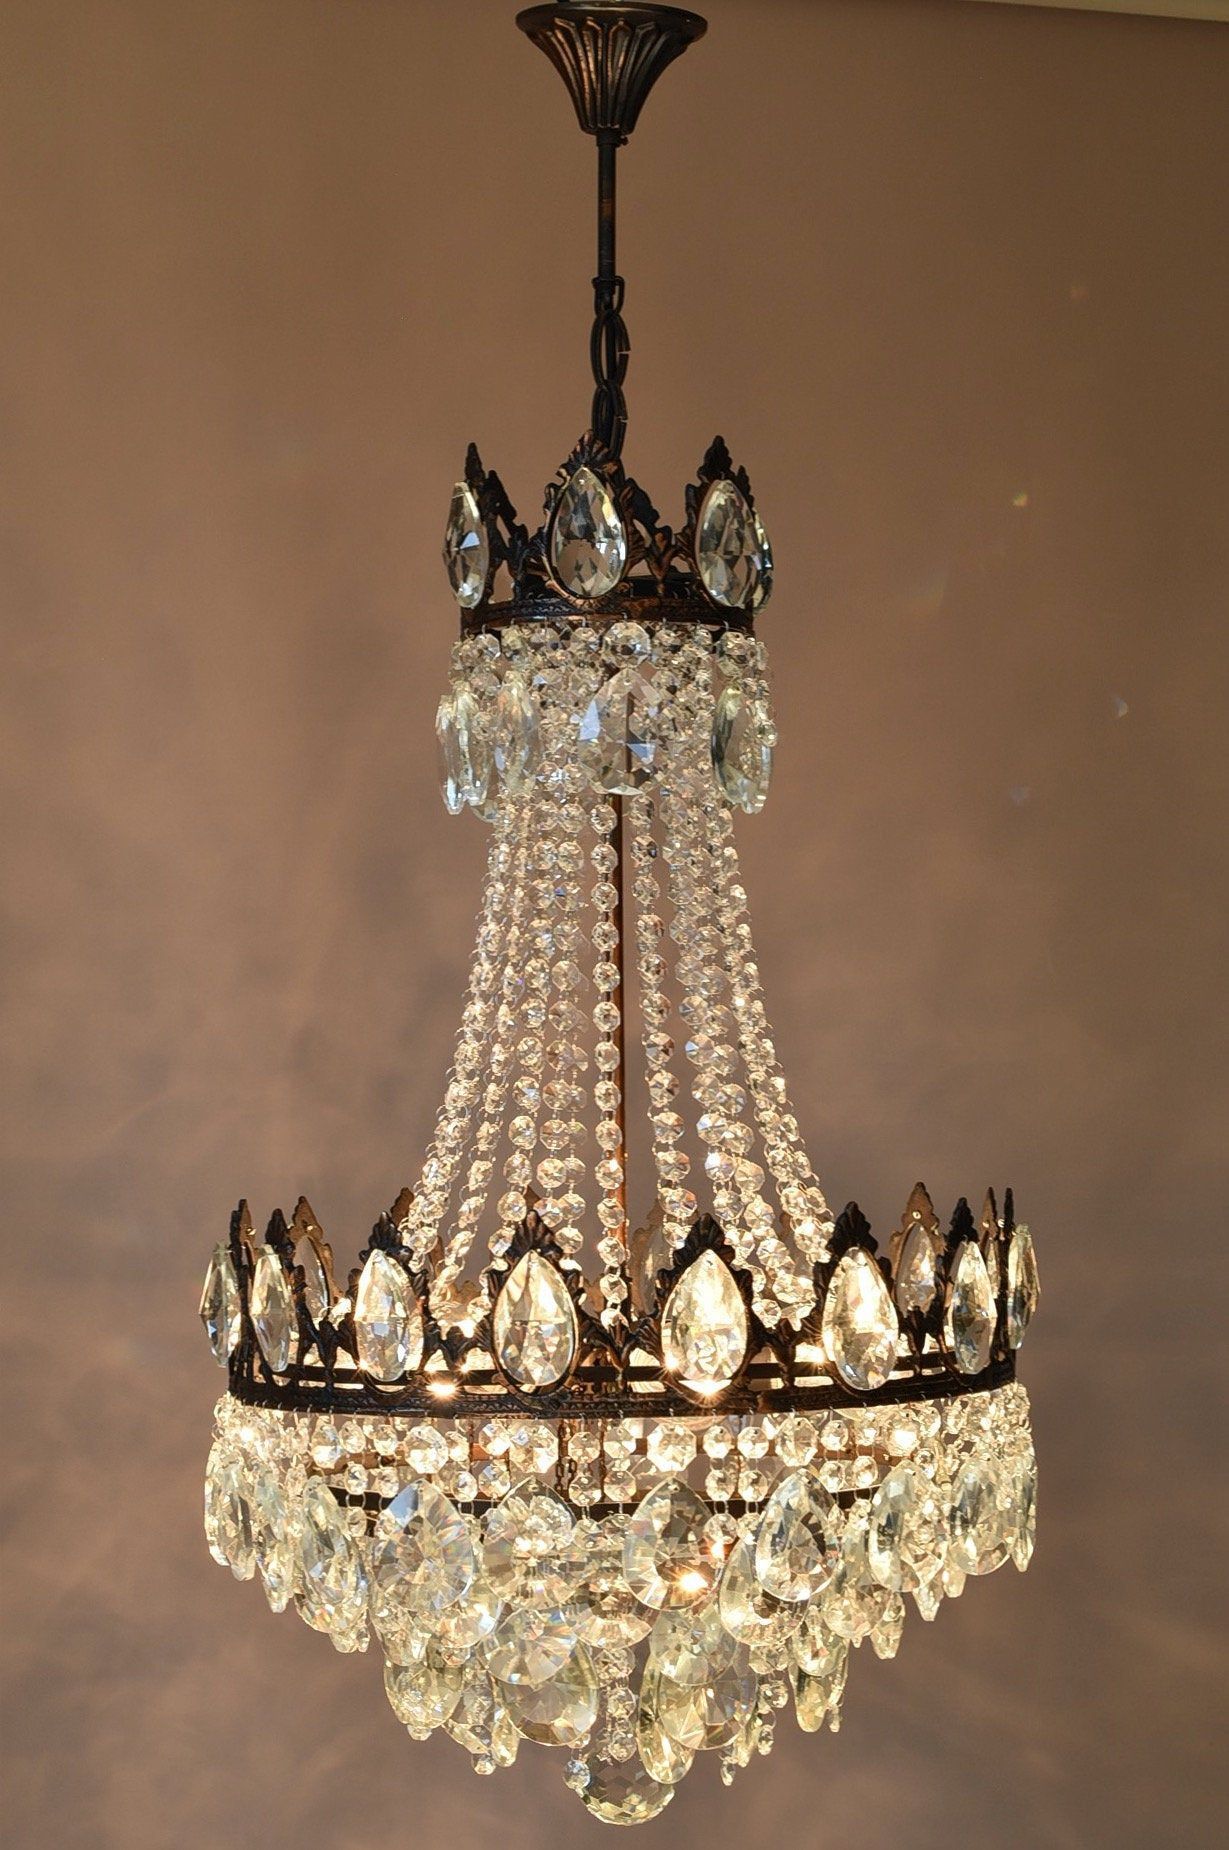 Empire Vintage Crystal Chandeliers Bronze Lighting Antique Inside Bronze And Scavo Glass Chandeliers (View 14 of 15)